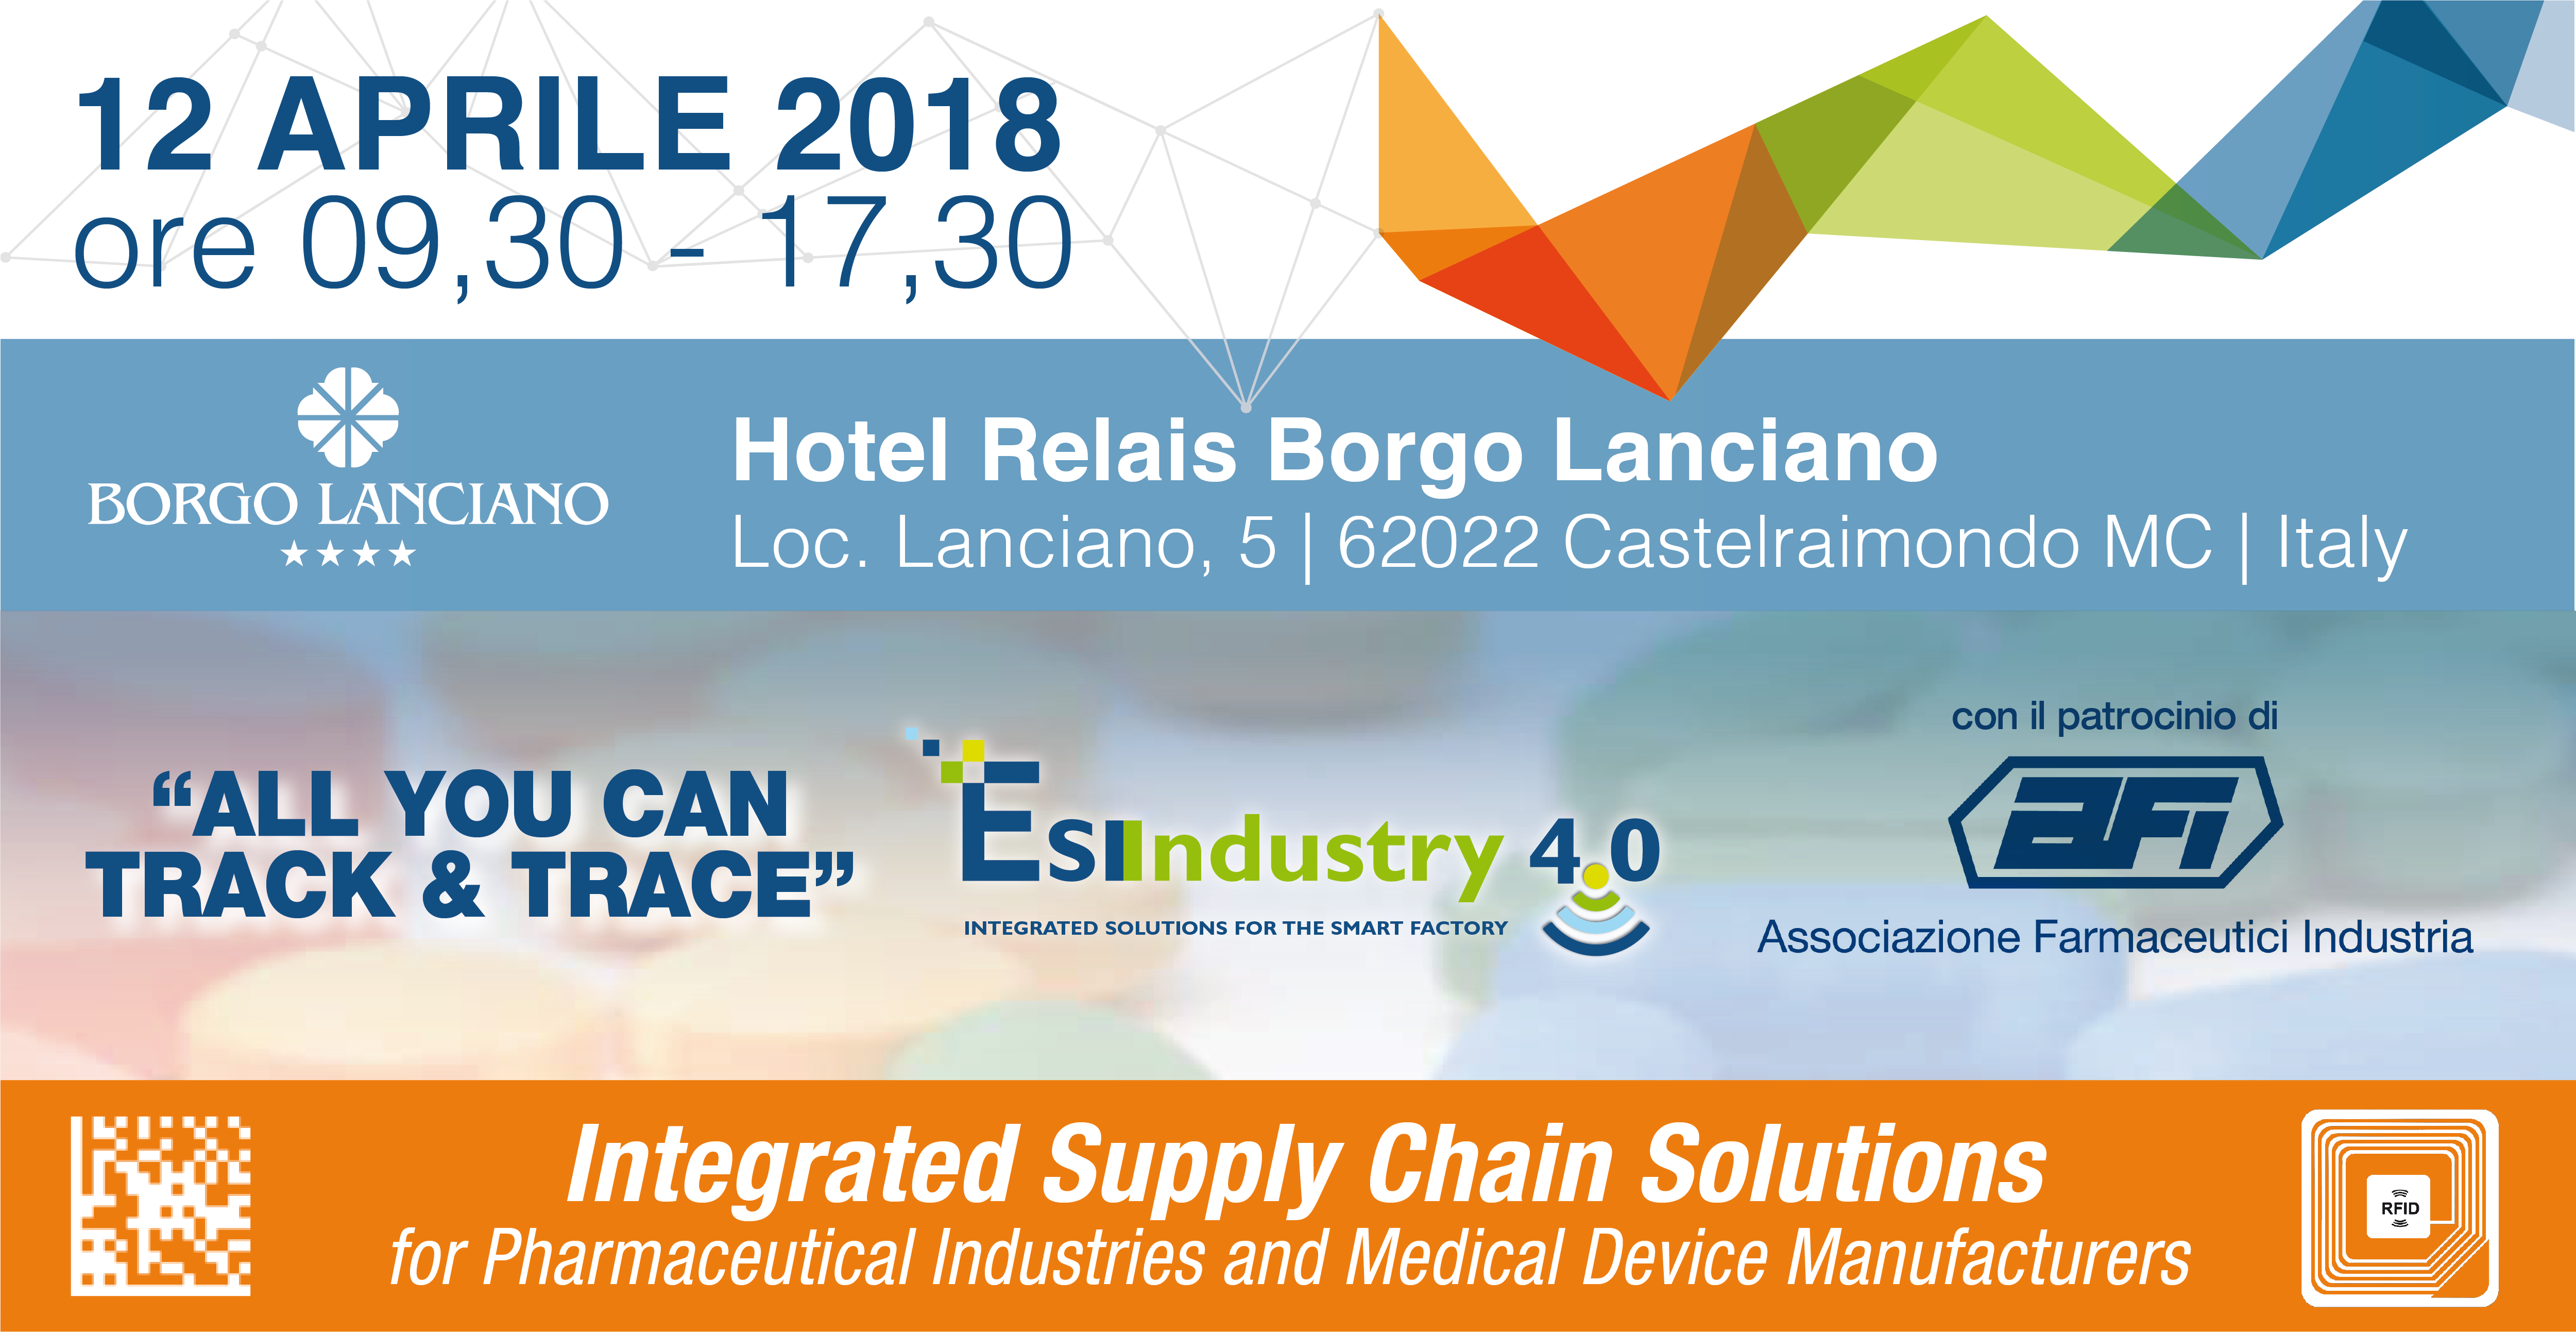 All You Can Track And Trace - 2018 | ESINDUSTRY 4.0 | Integrated Supply Chain Solutions for Pharmaceutical Industries and Medical Device Manufacturers 01